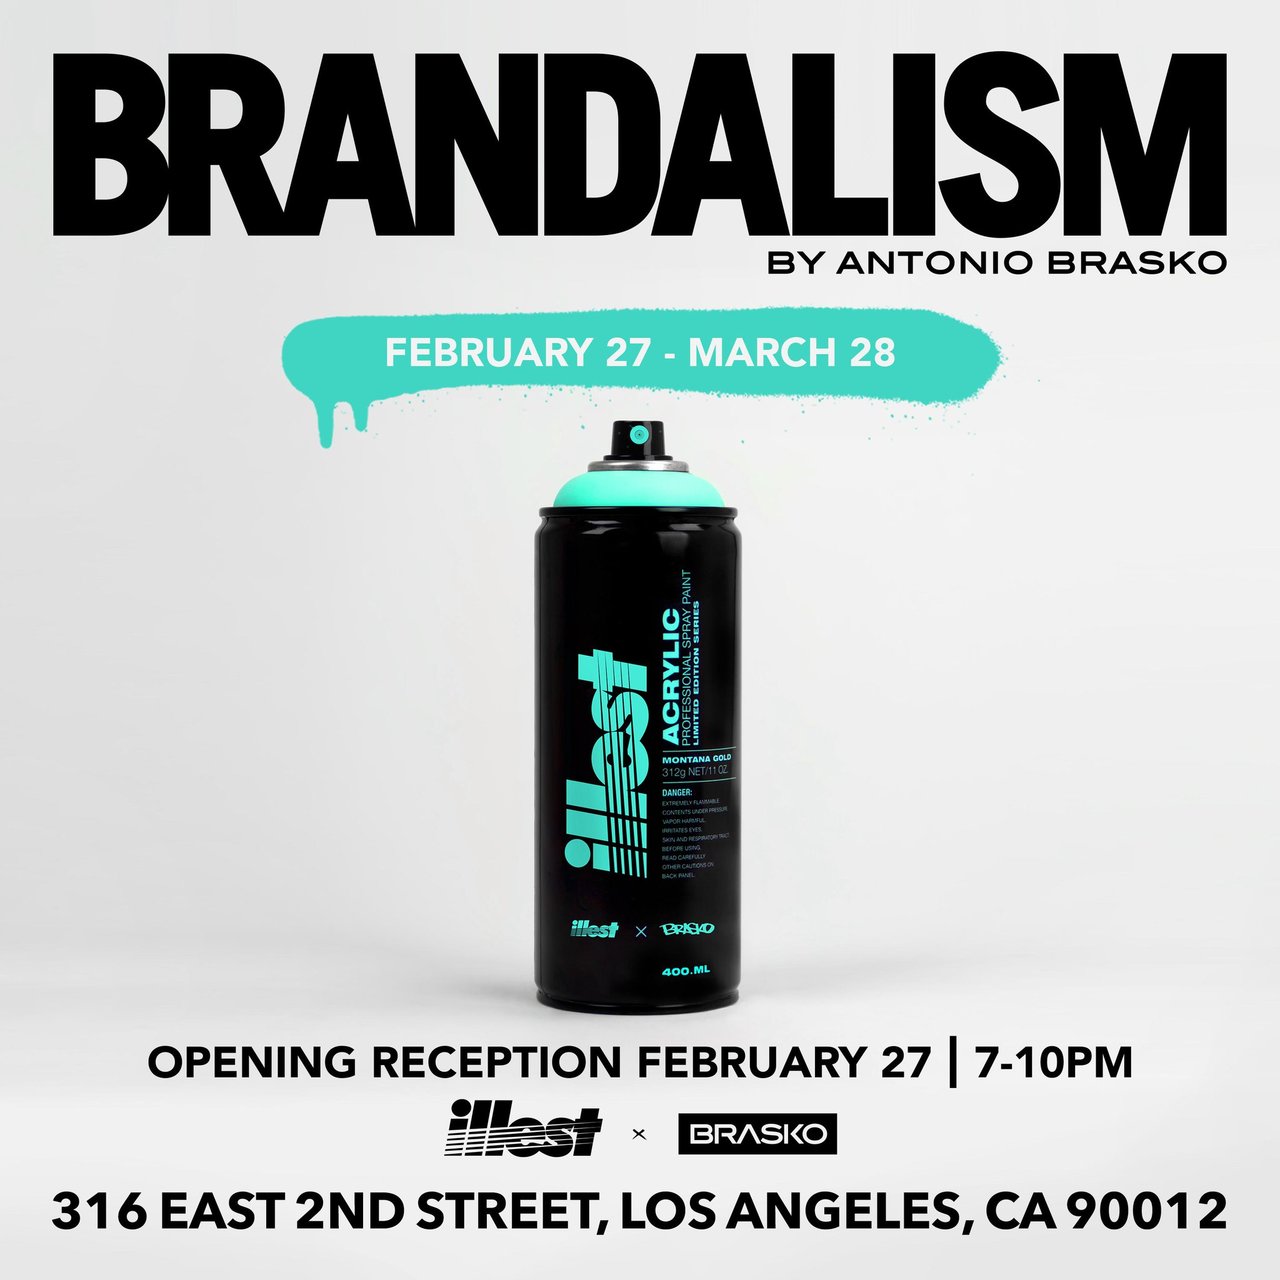 On my way to #LosAngeles for the #Brandalism show at @illestBrand this #Friday. #LAWeekly #Art #Graffiti #Fashion http://t.co/B5TdapMBEx